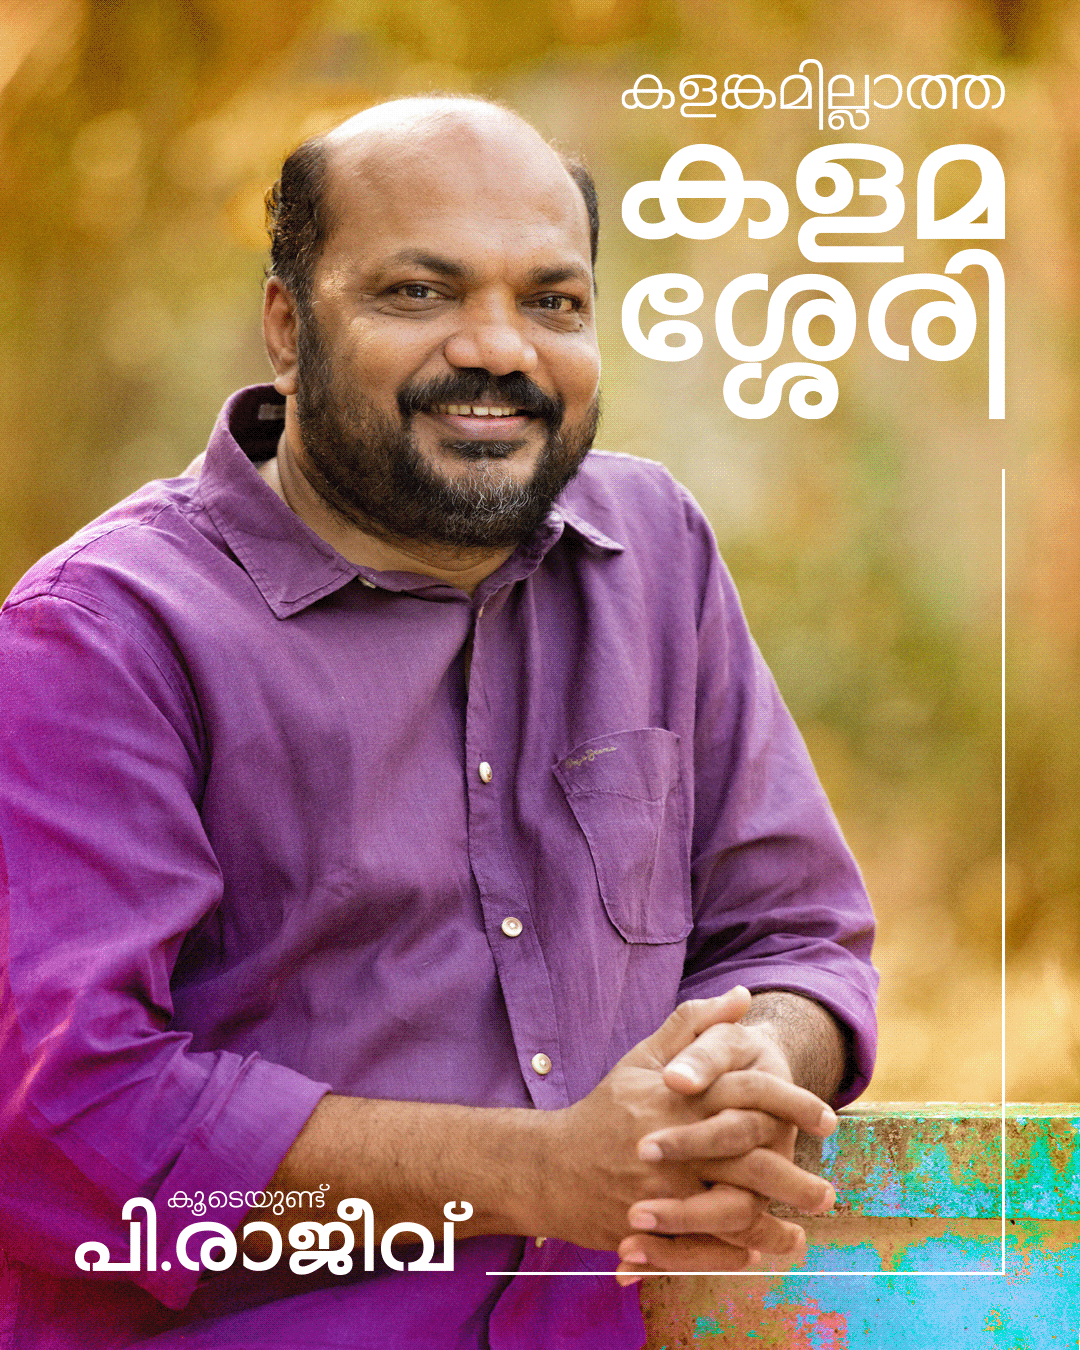 election campaign Election poster KERALA ELECTION POSTER Political campaign Poster Design